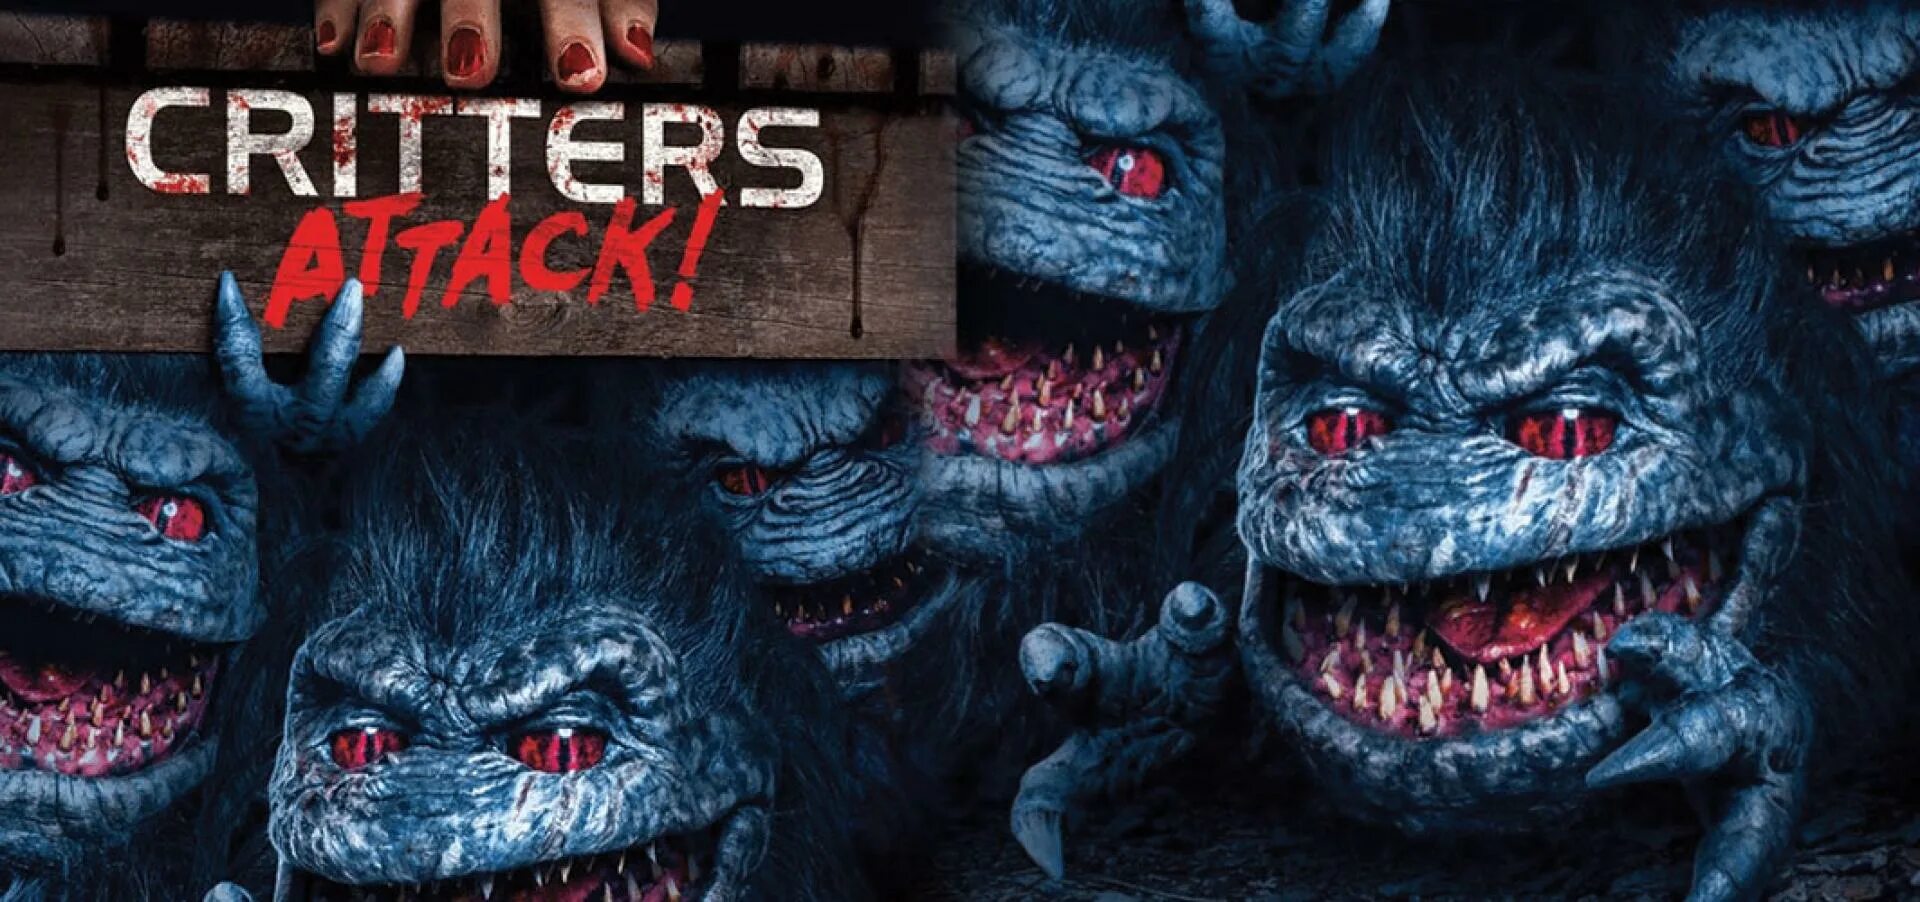 Smiling critters fnf. Зубастики атакуют! / Critters Attack! (2019).